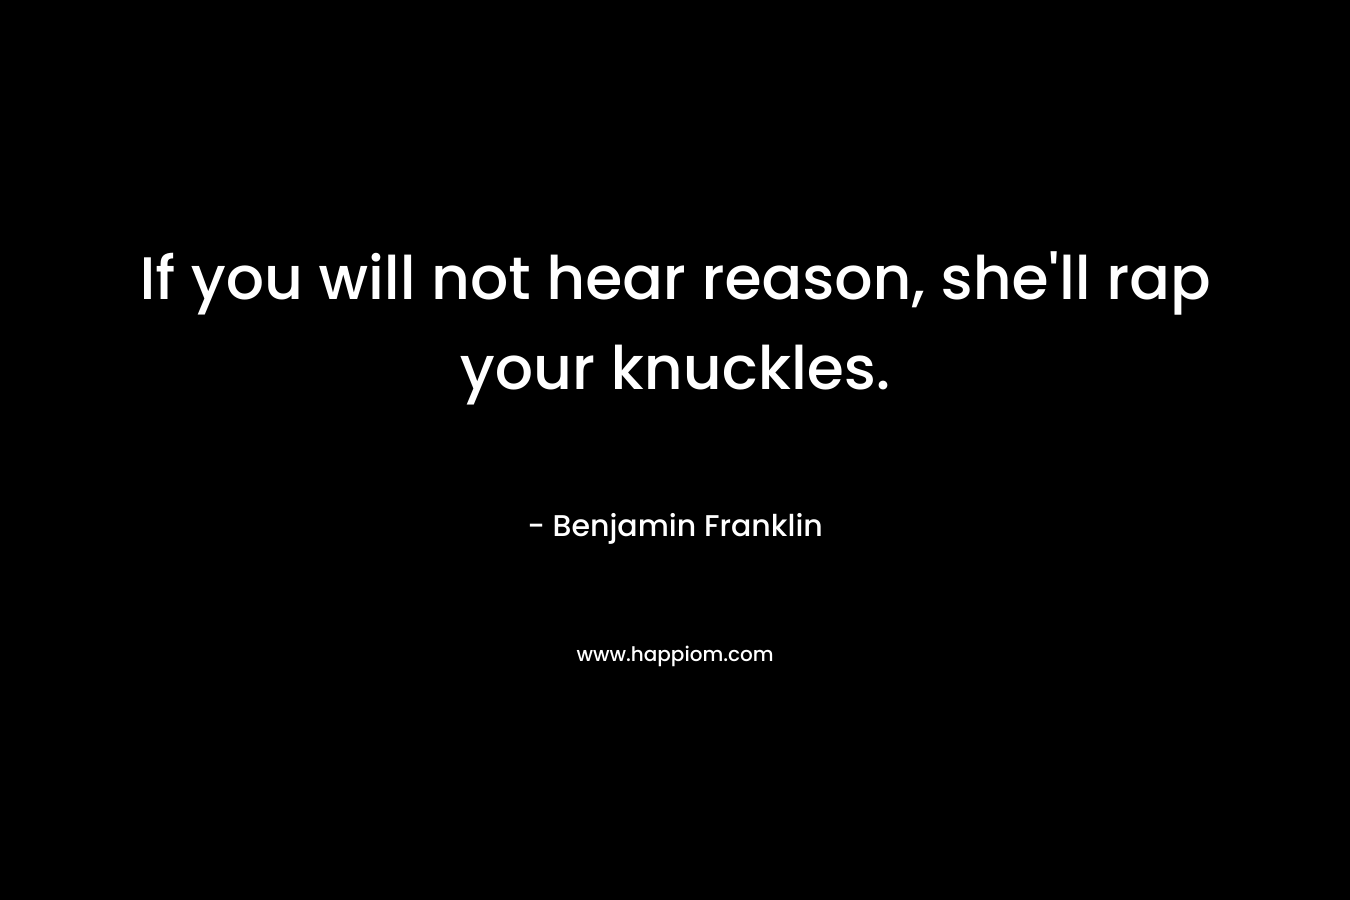 If you will not hear reason, she’ll rap your knuckles. – Benjamin Franklin